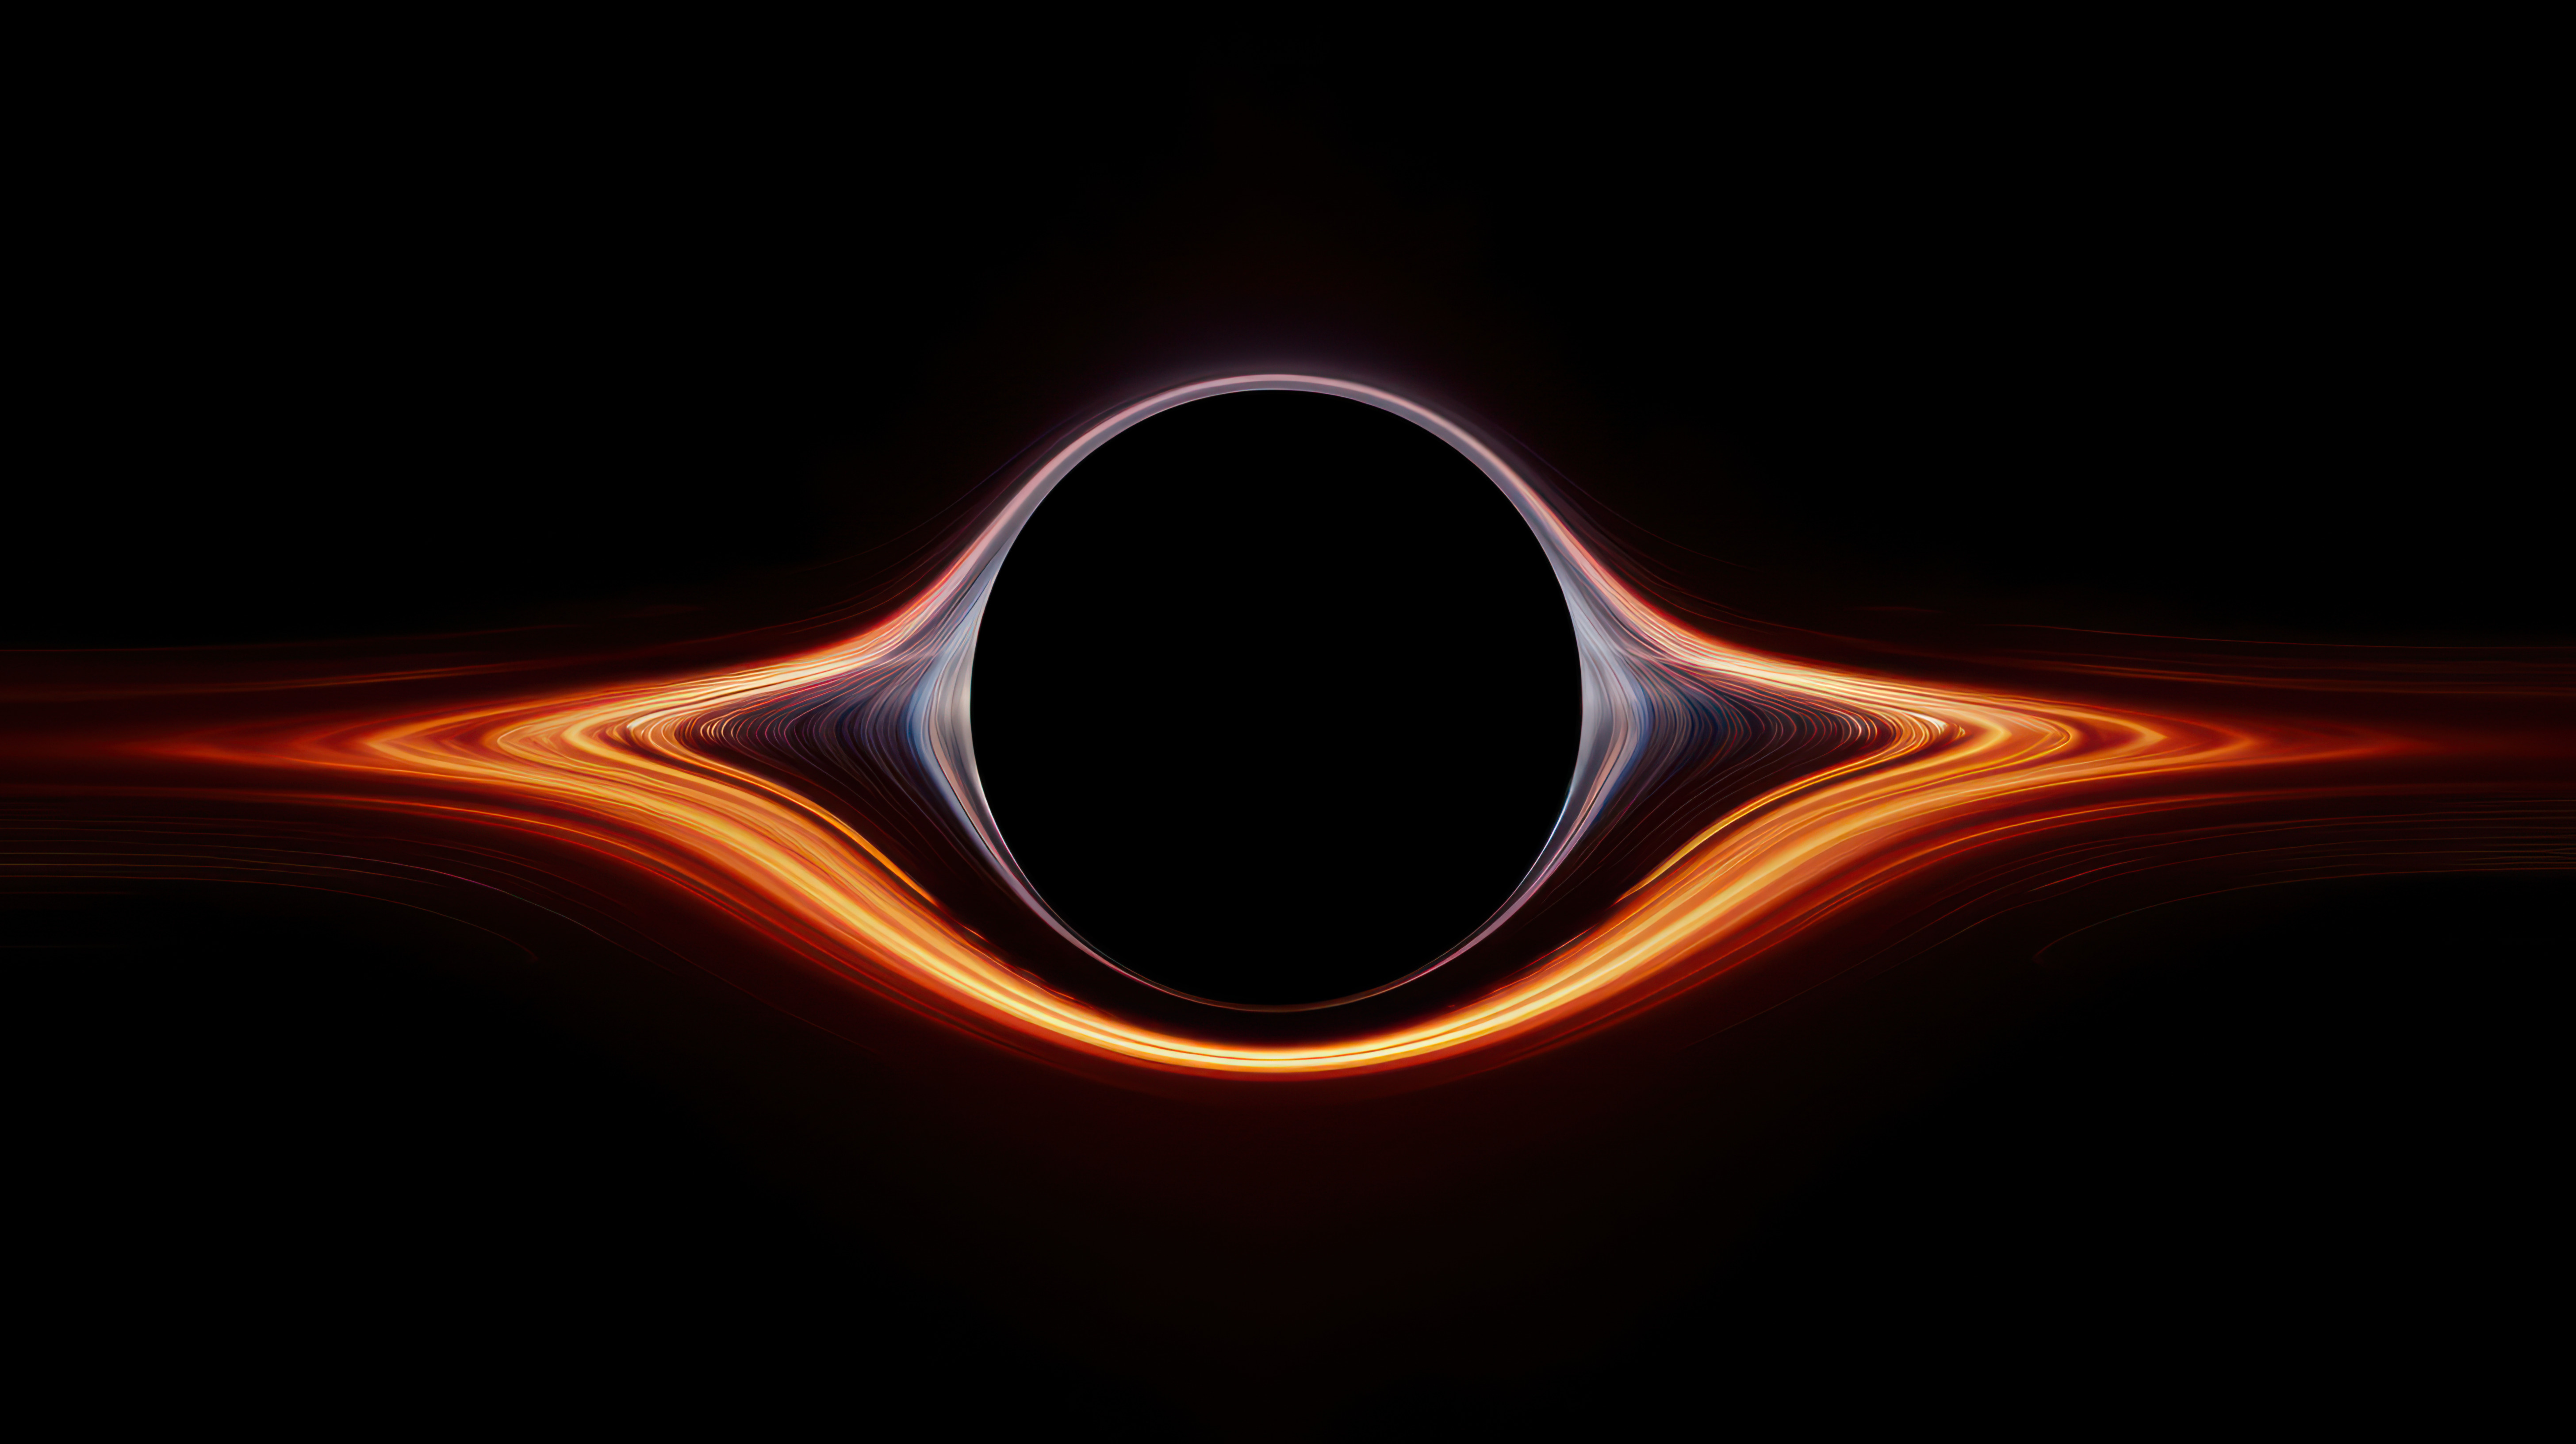 A digital rendering of a black hole with a glowing, distorted light accretion disk around its event horizon in space, set against a pitch-black background.